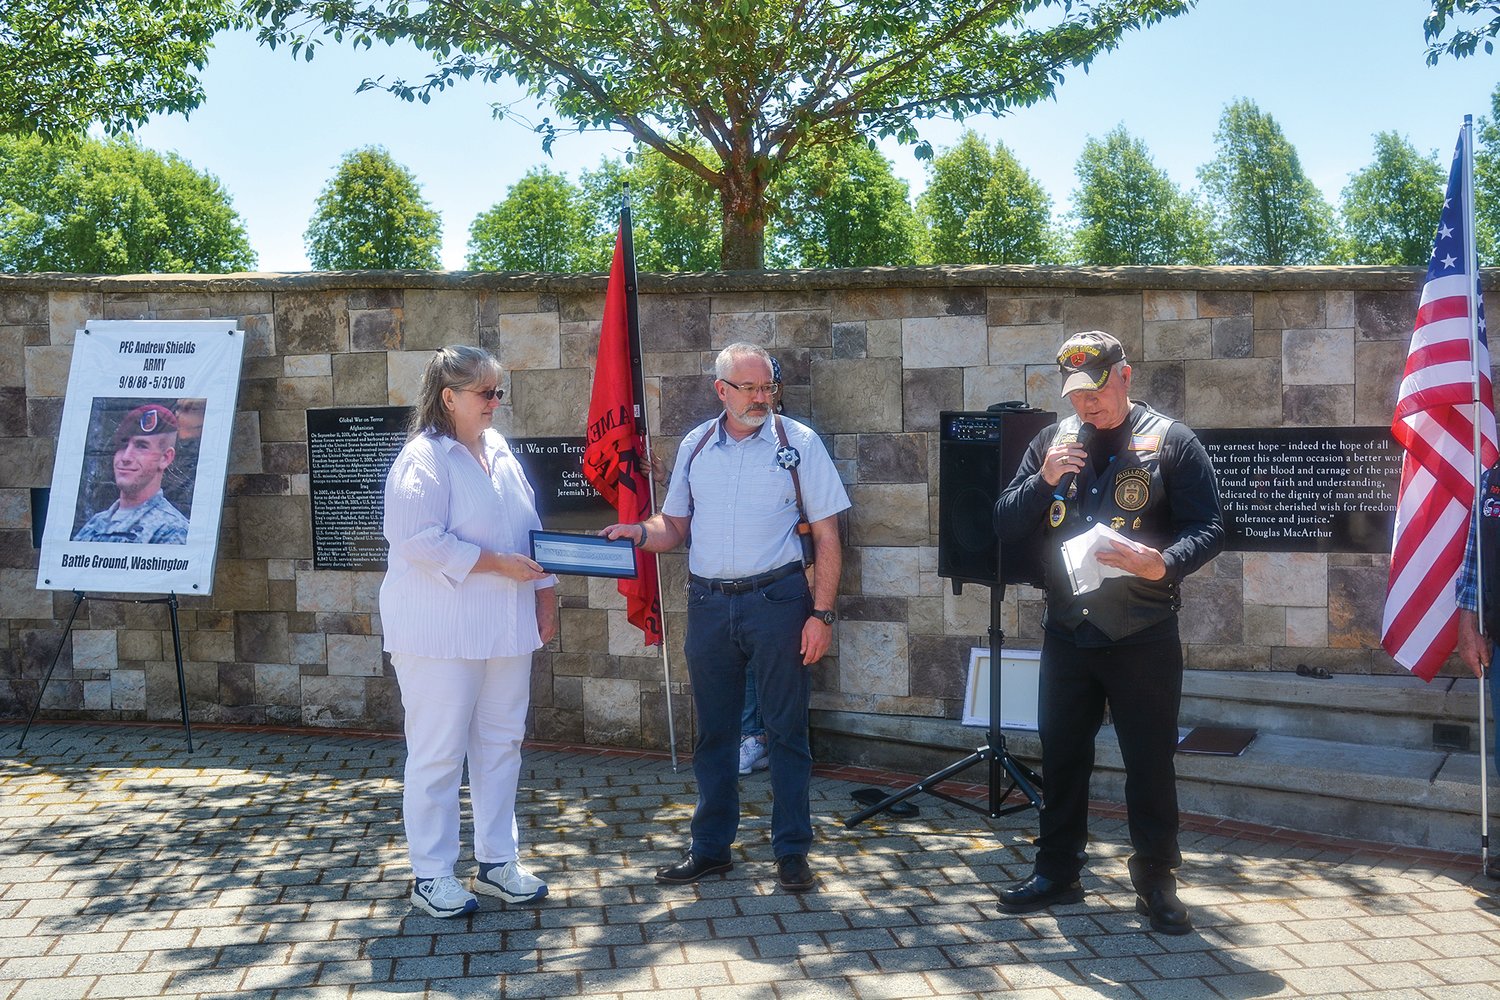 PFC Andrew Jon Shields’ parents, Wendy Campbell and Jon Shields, are presented with a plaque by Lynn Vaughn of the Patriot Guard Riders in honor of their son on May 31.